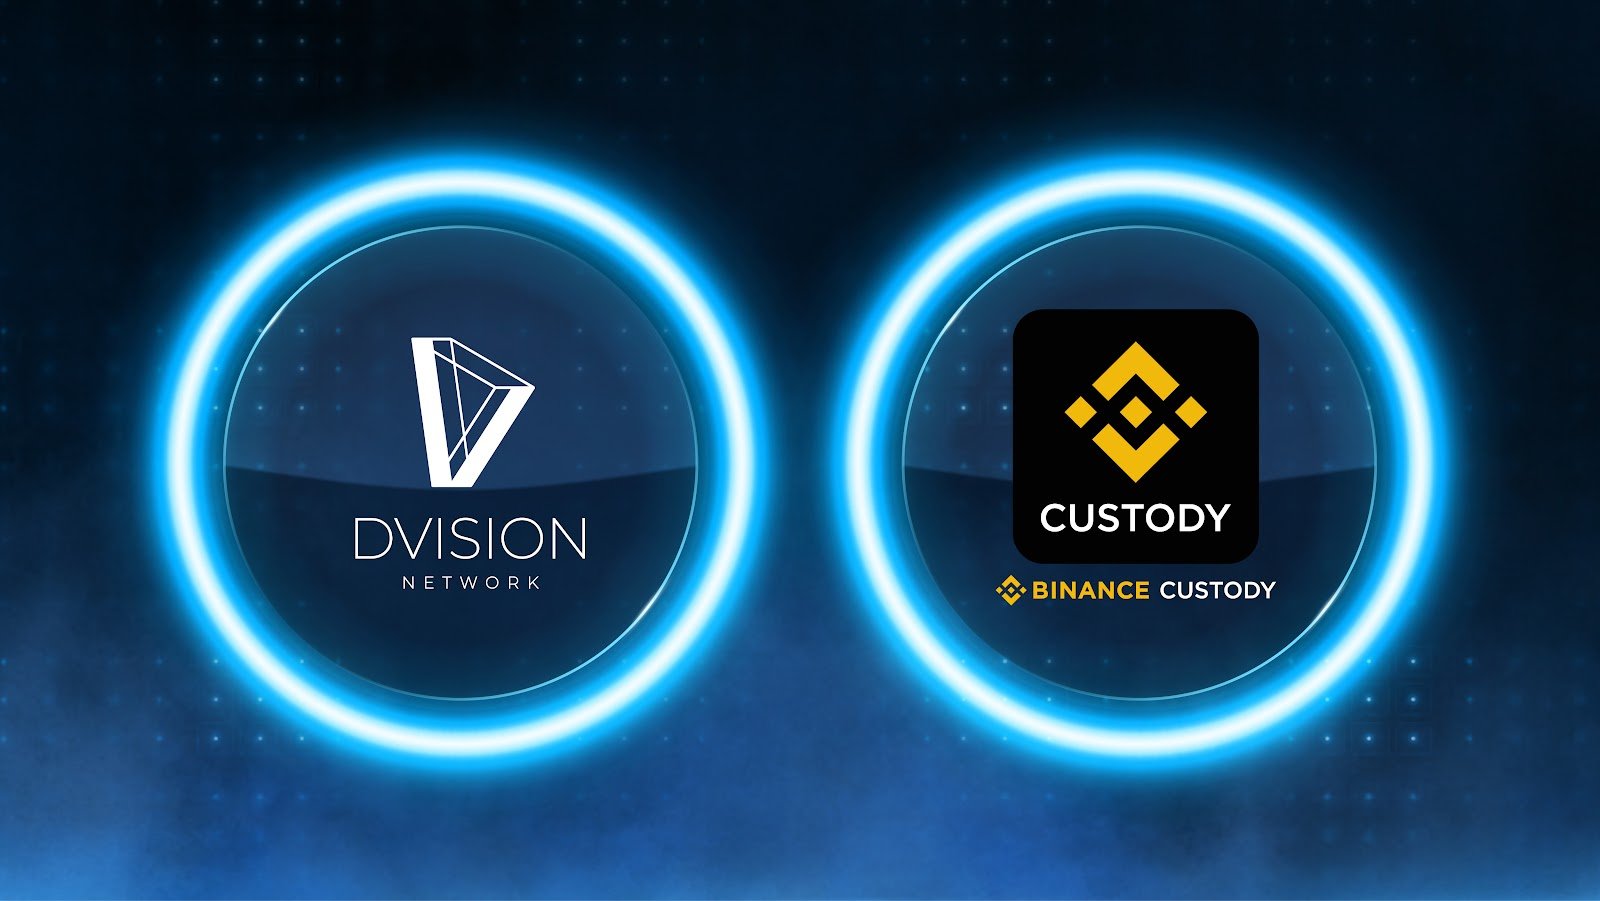 Binance Custody Has Been Named As Dvision Network's Custodian, With DVI Token Support